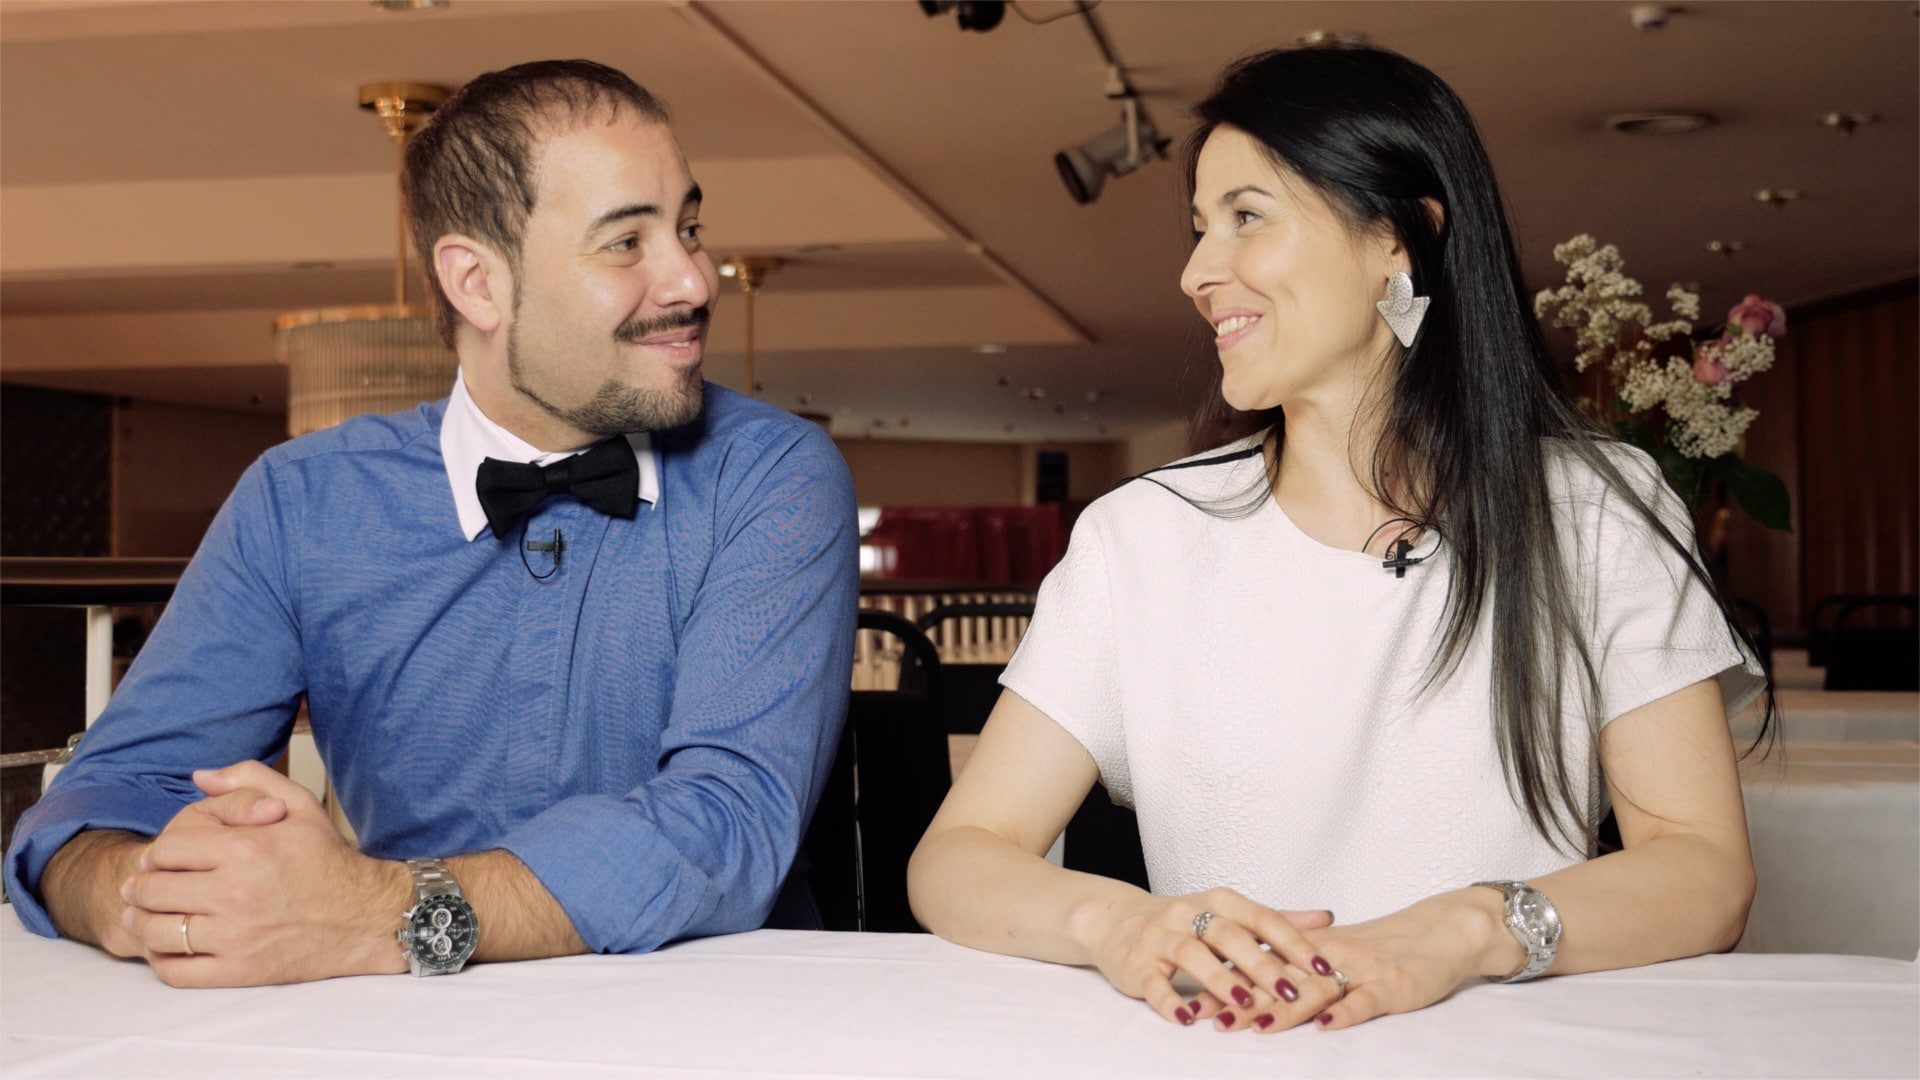 Video Preview Image of How did Cristina Sosa and Daniel Nacucchio meet each other? » 030tango Short